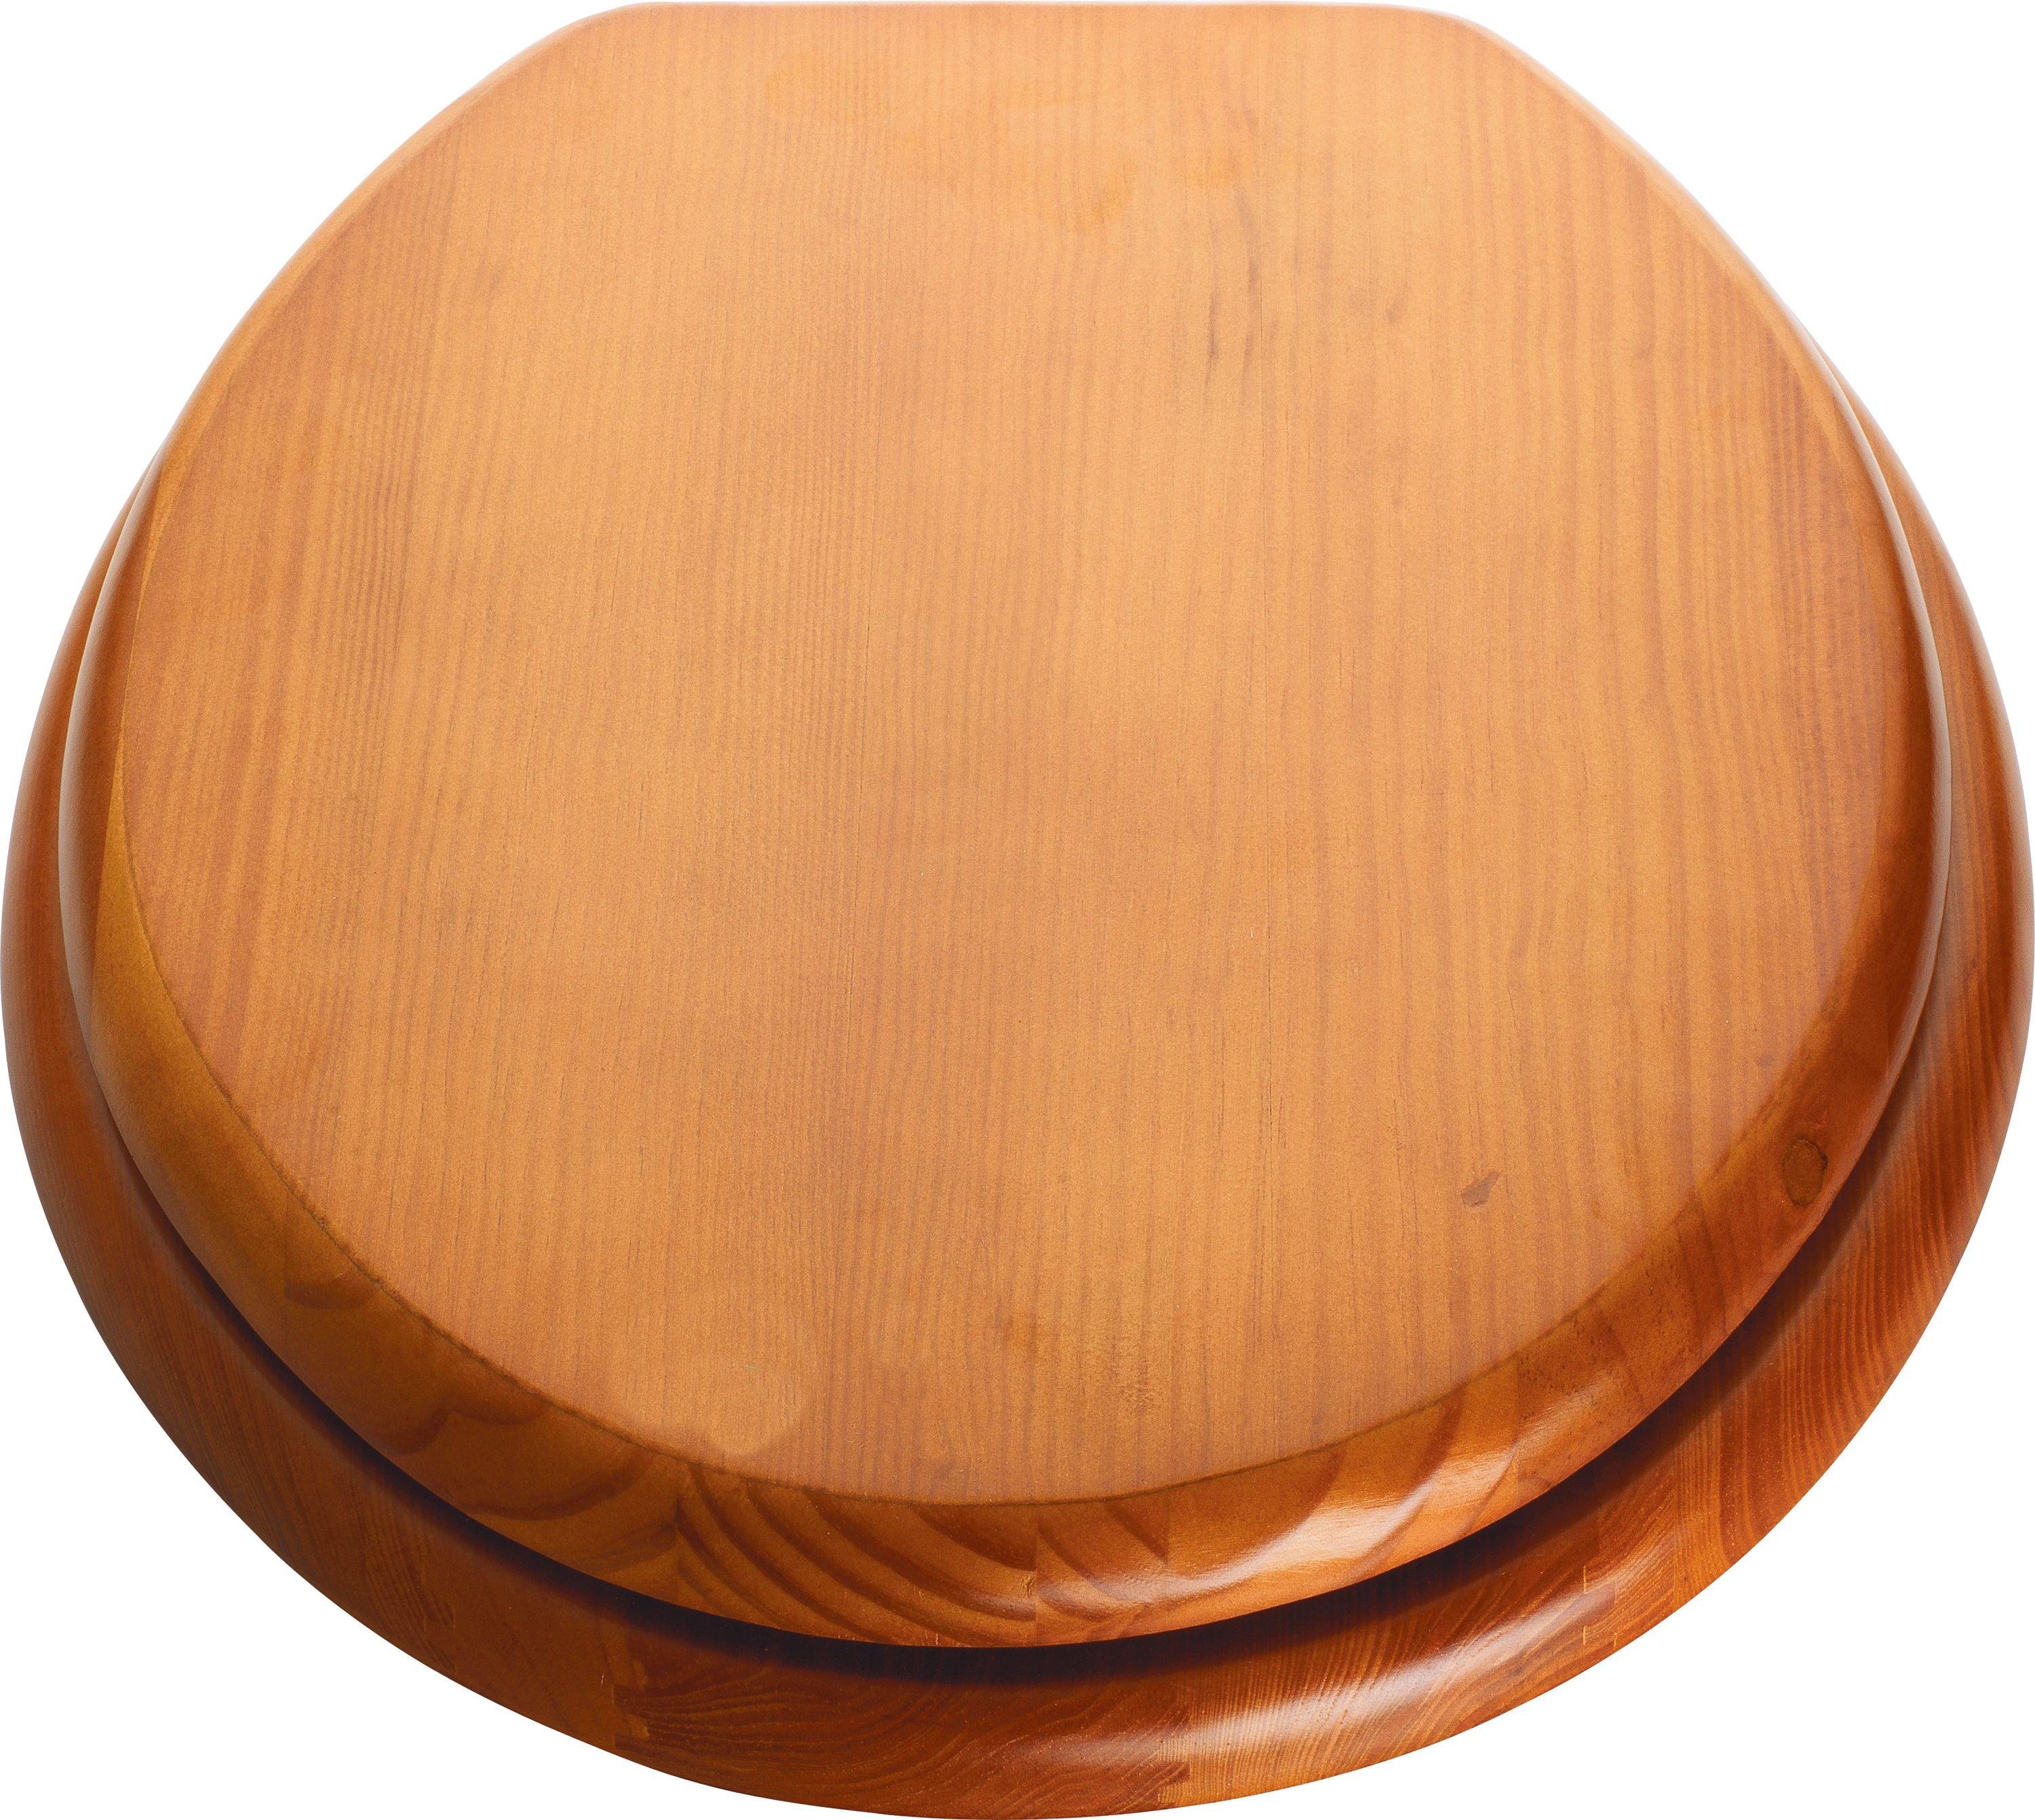 Buy HOME Moulded Wood Toilet Seat - Antique Pine at Argos.co.uk - Your